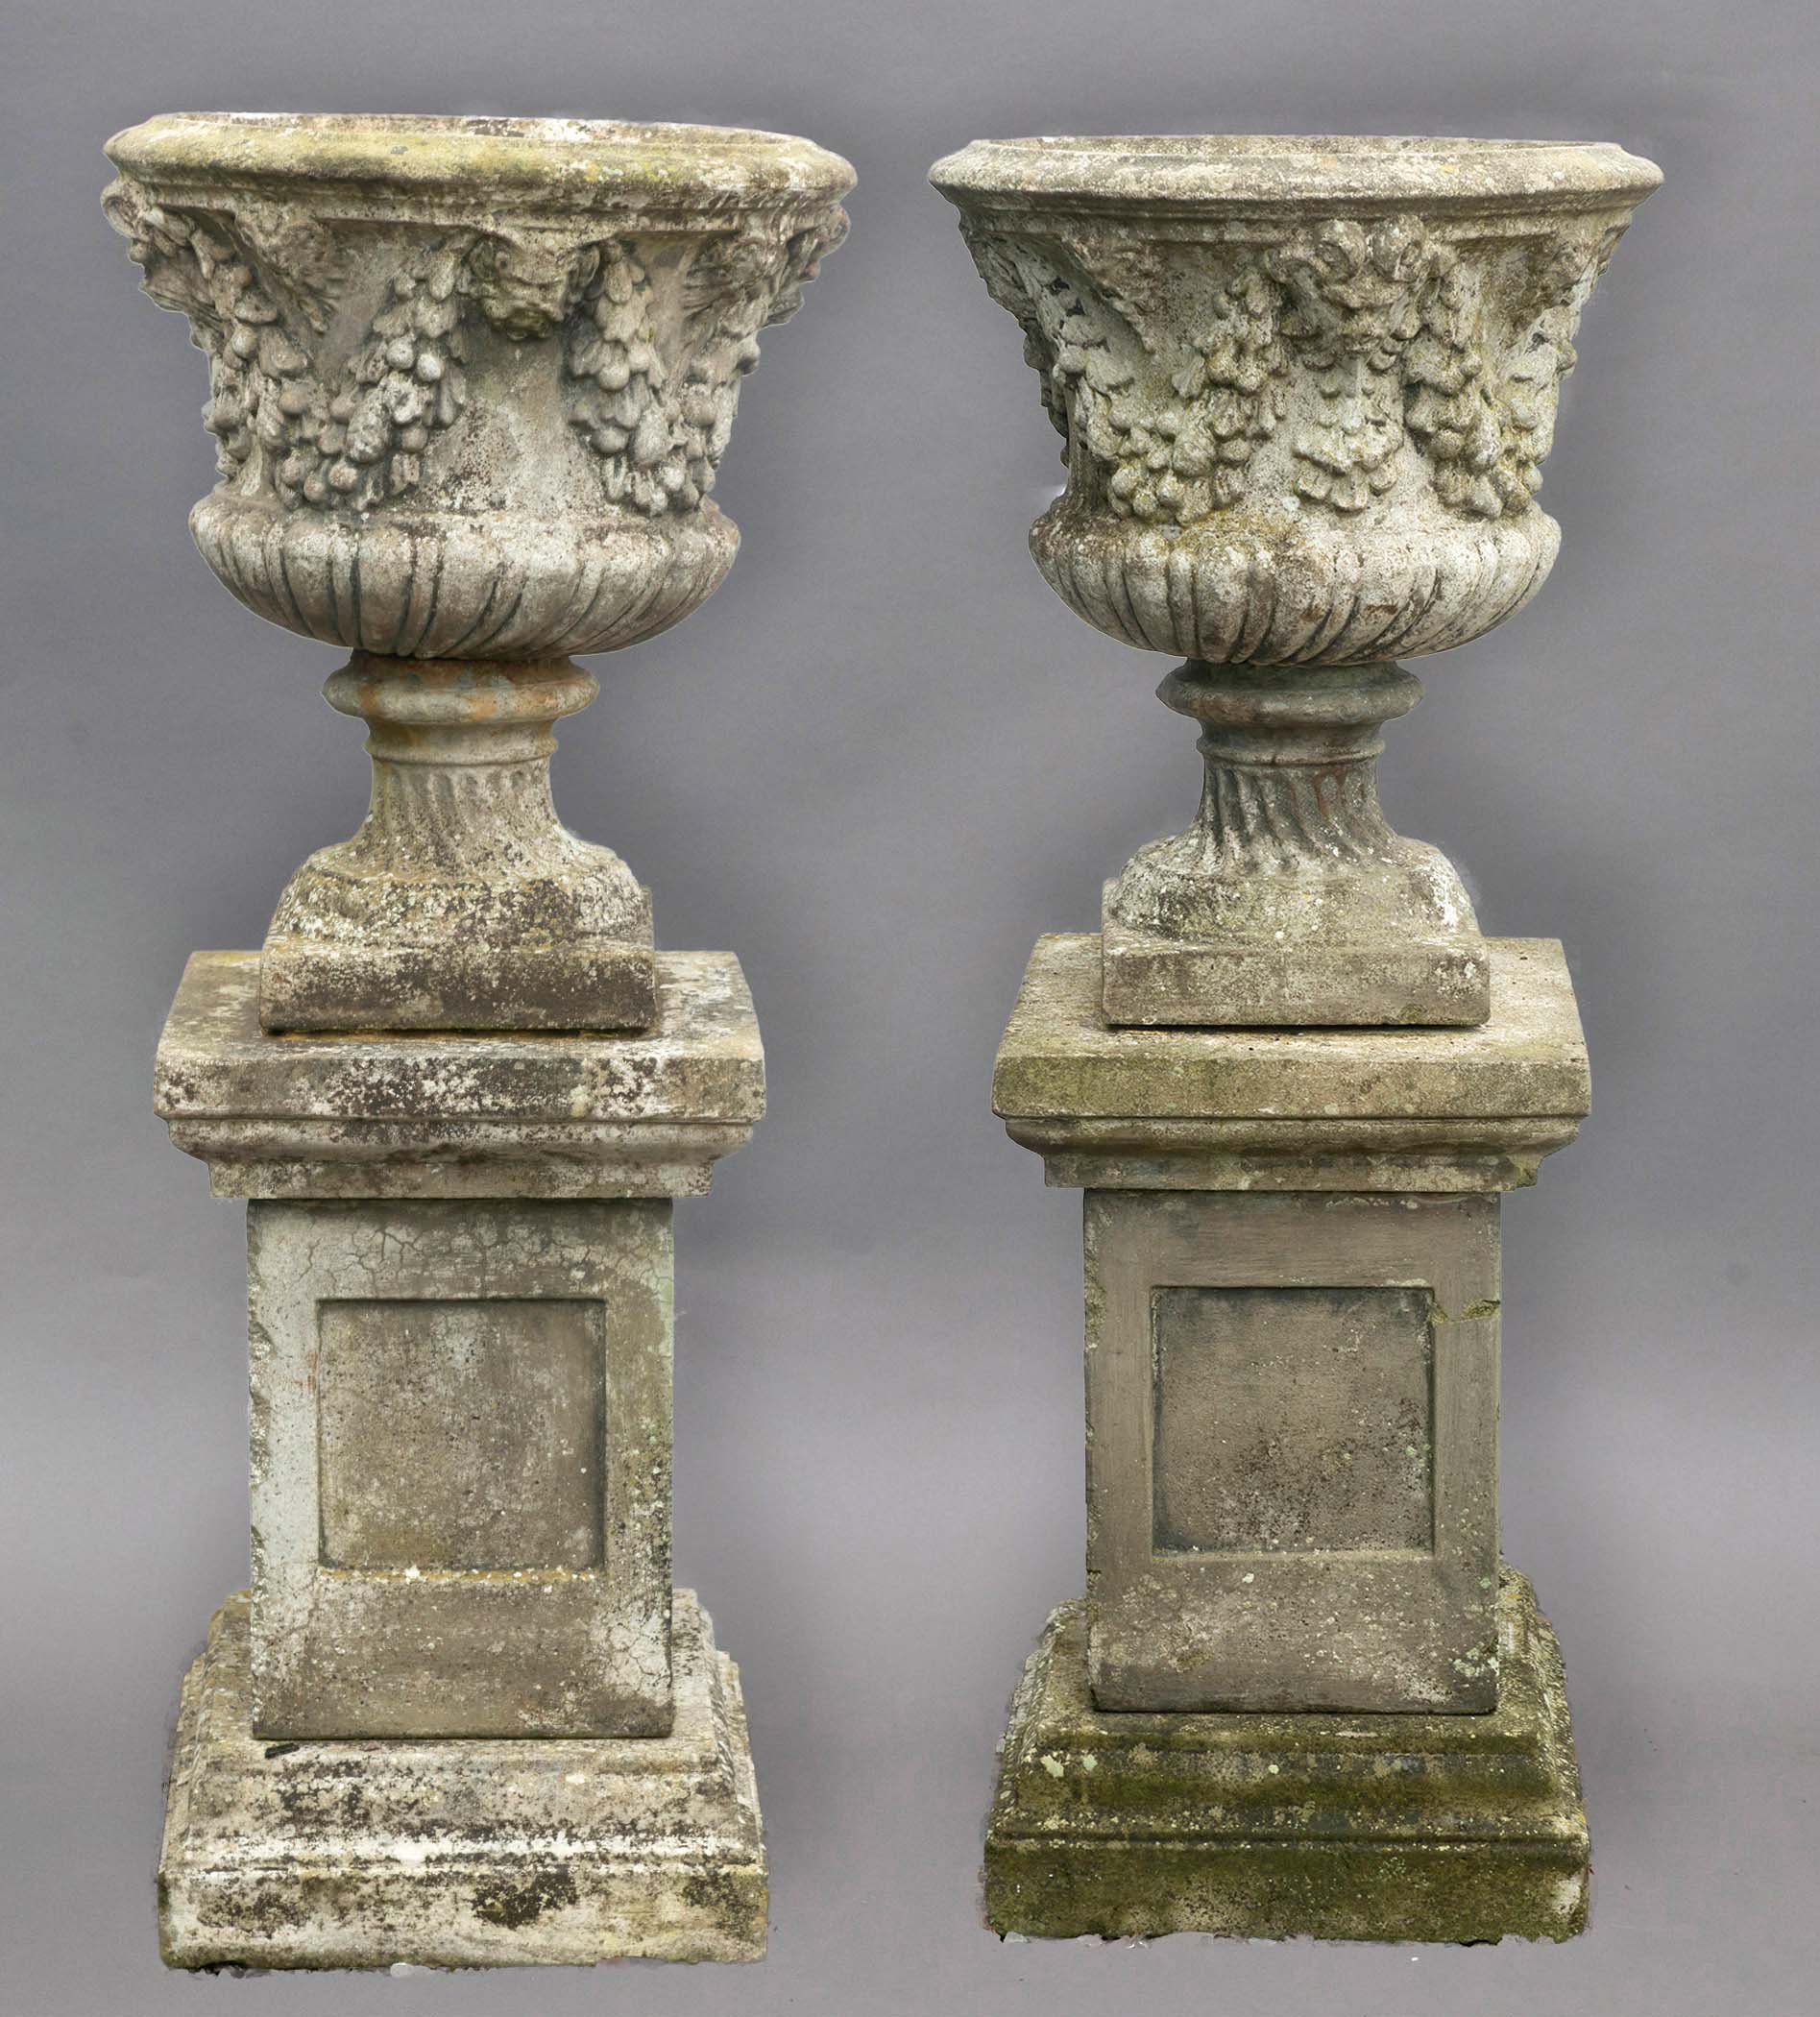 PAIR OF RECONSTITUTED STONE URNS ON PEDESTALS, with mask and foliate swag decoration on wrythen